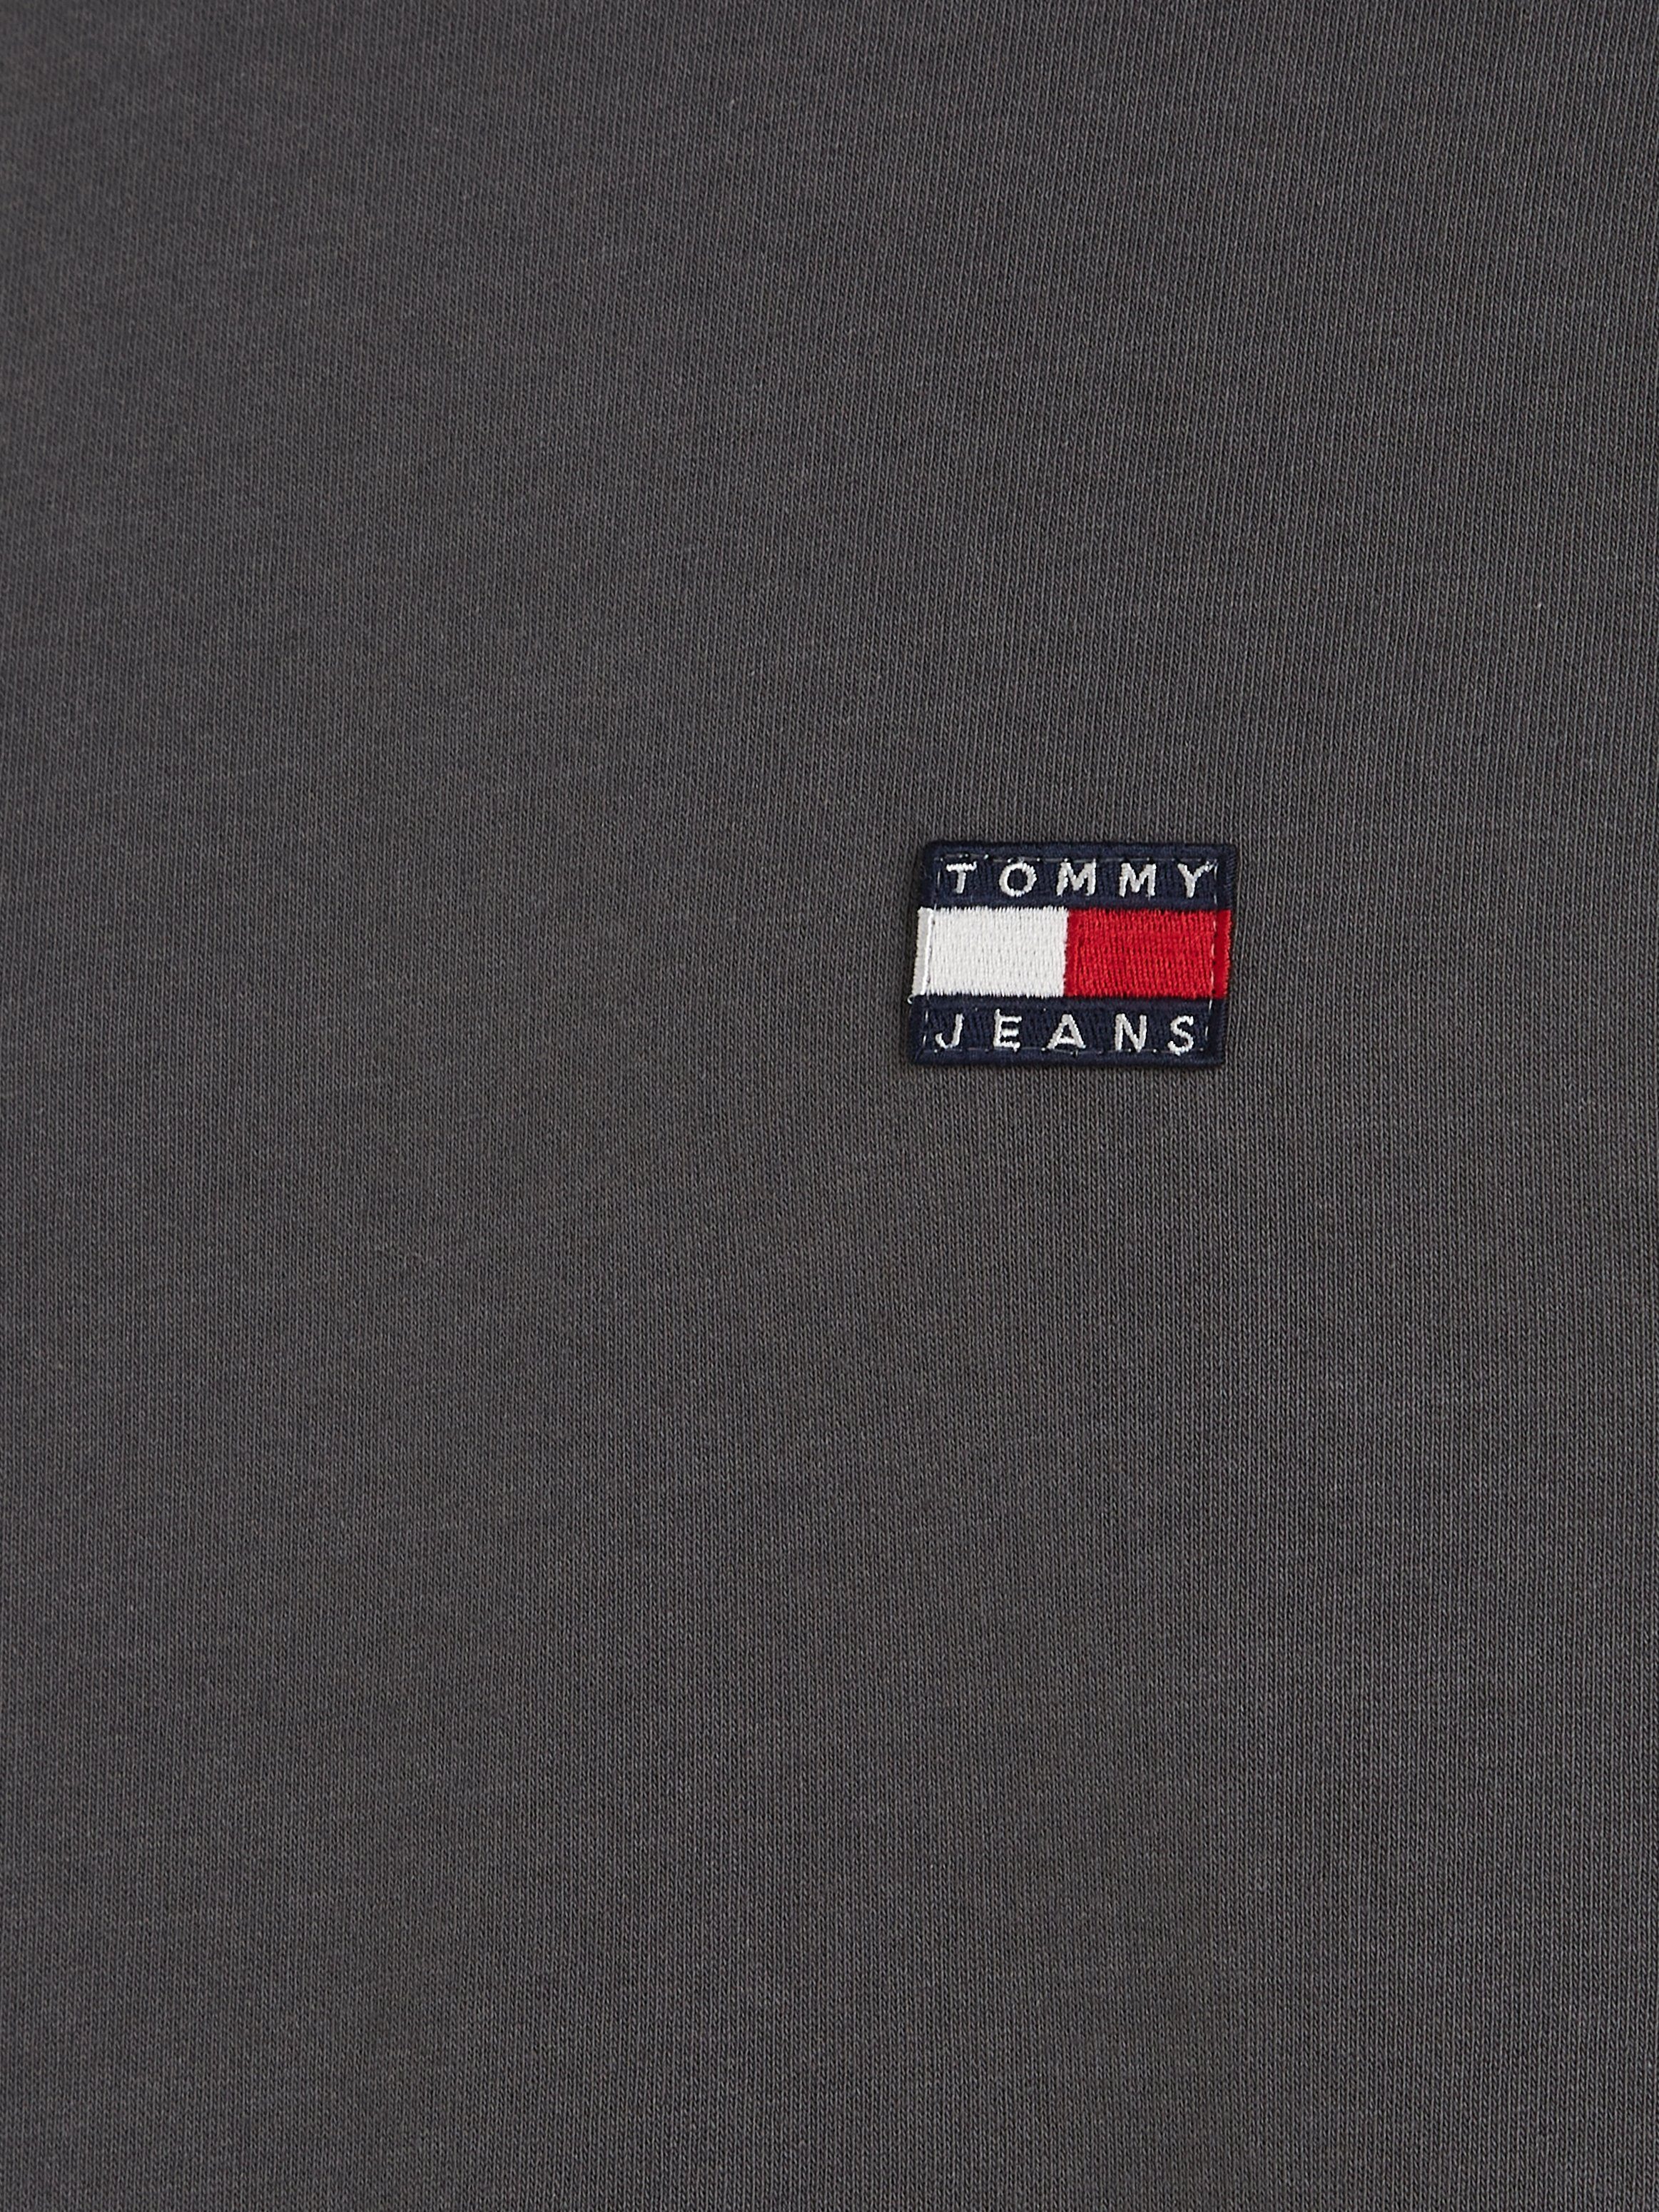 TJM Charcoal BADGE T-Shirt Jeans TOMMY New CLSC XS TEE Tommy